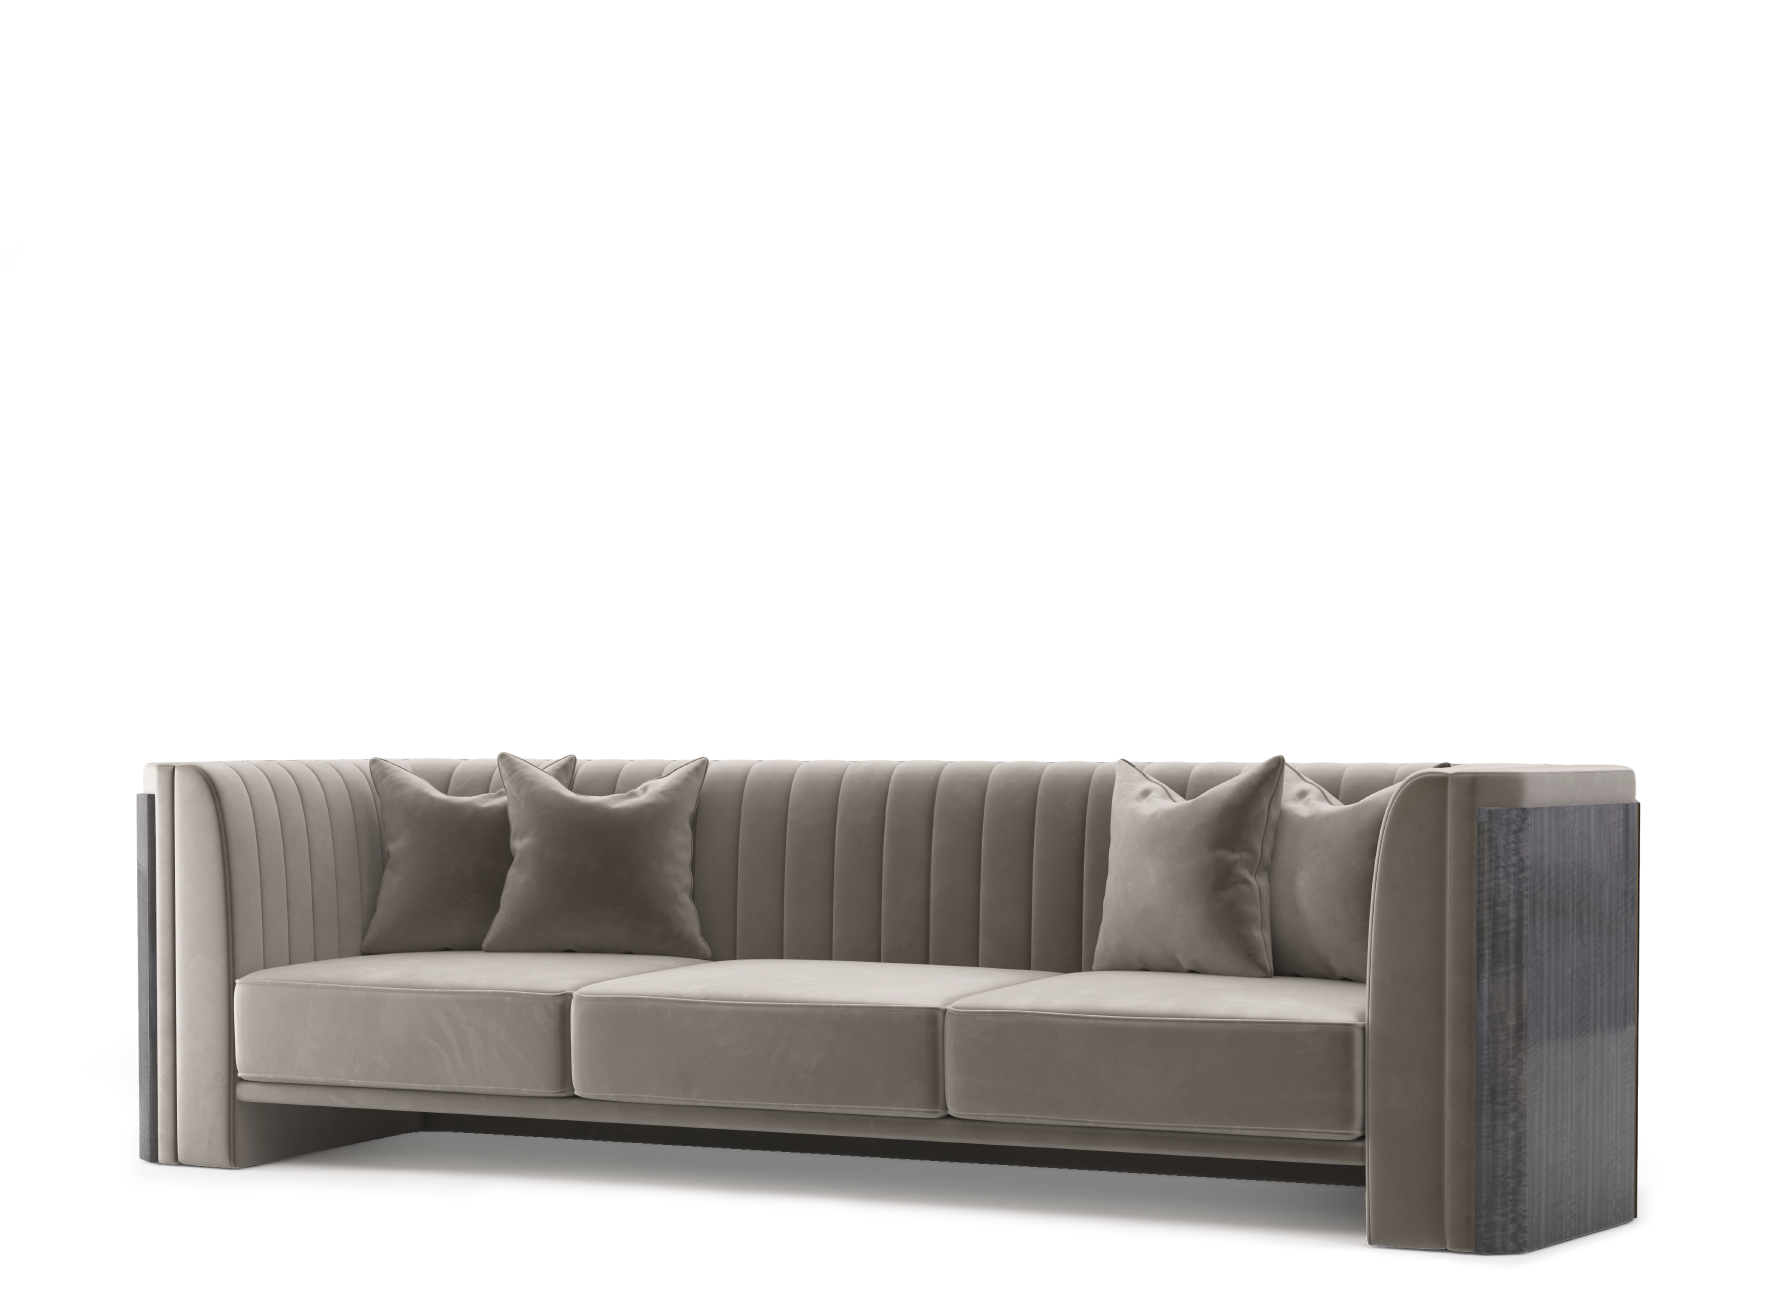 Algerone Sofa - The Ultimate Expression Of Comfort And Luxury!